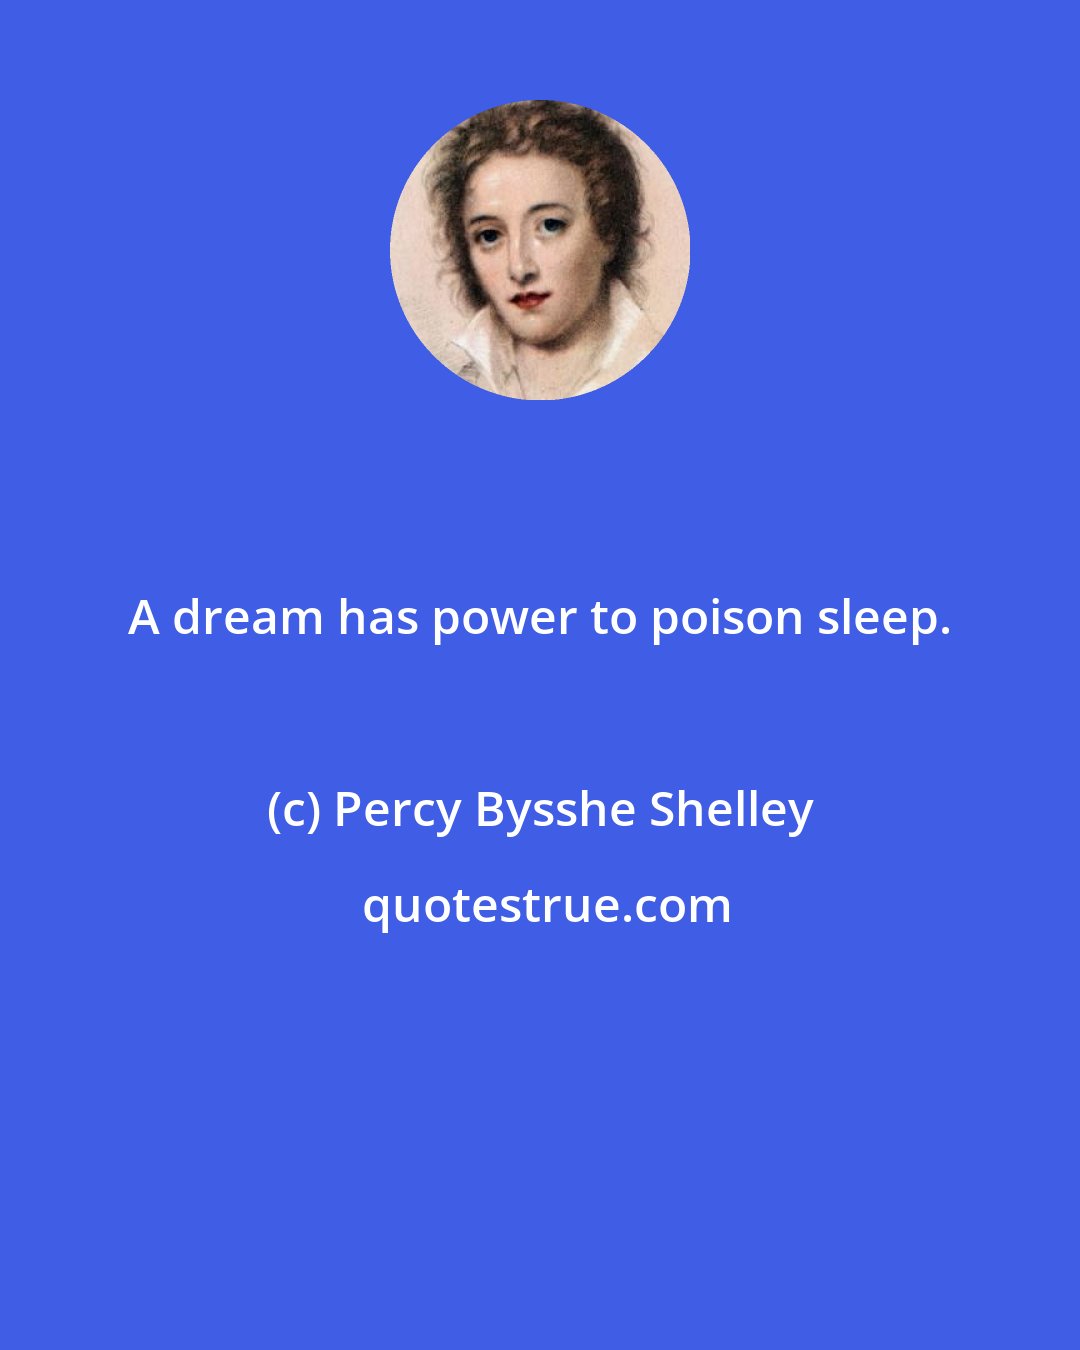 Percy Bysshe Shelley: A dream has power to poison sleep.